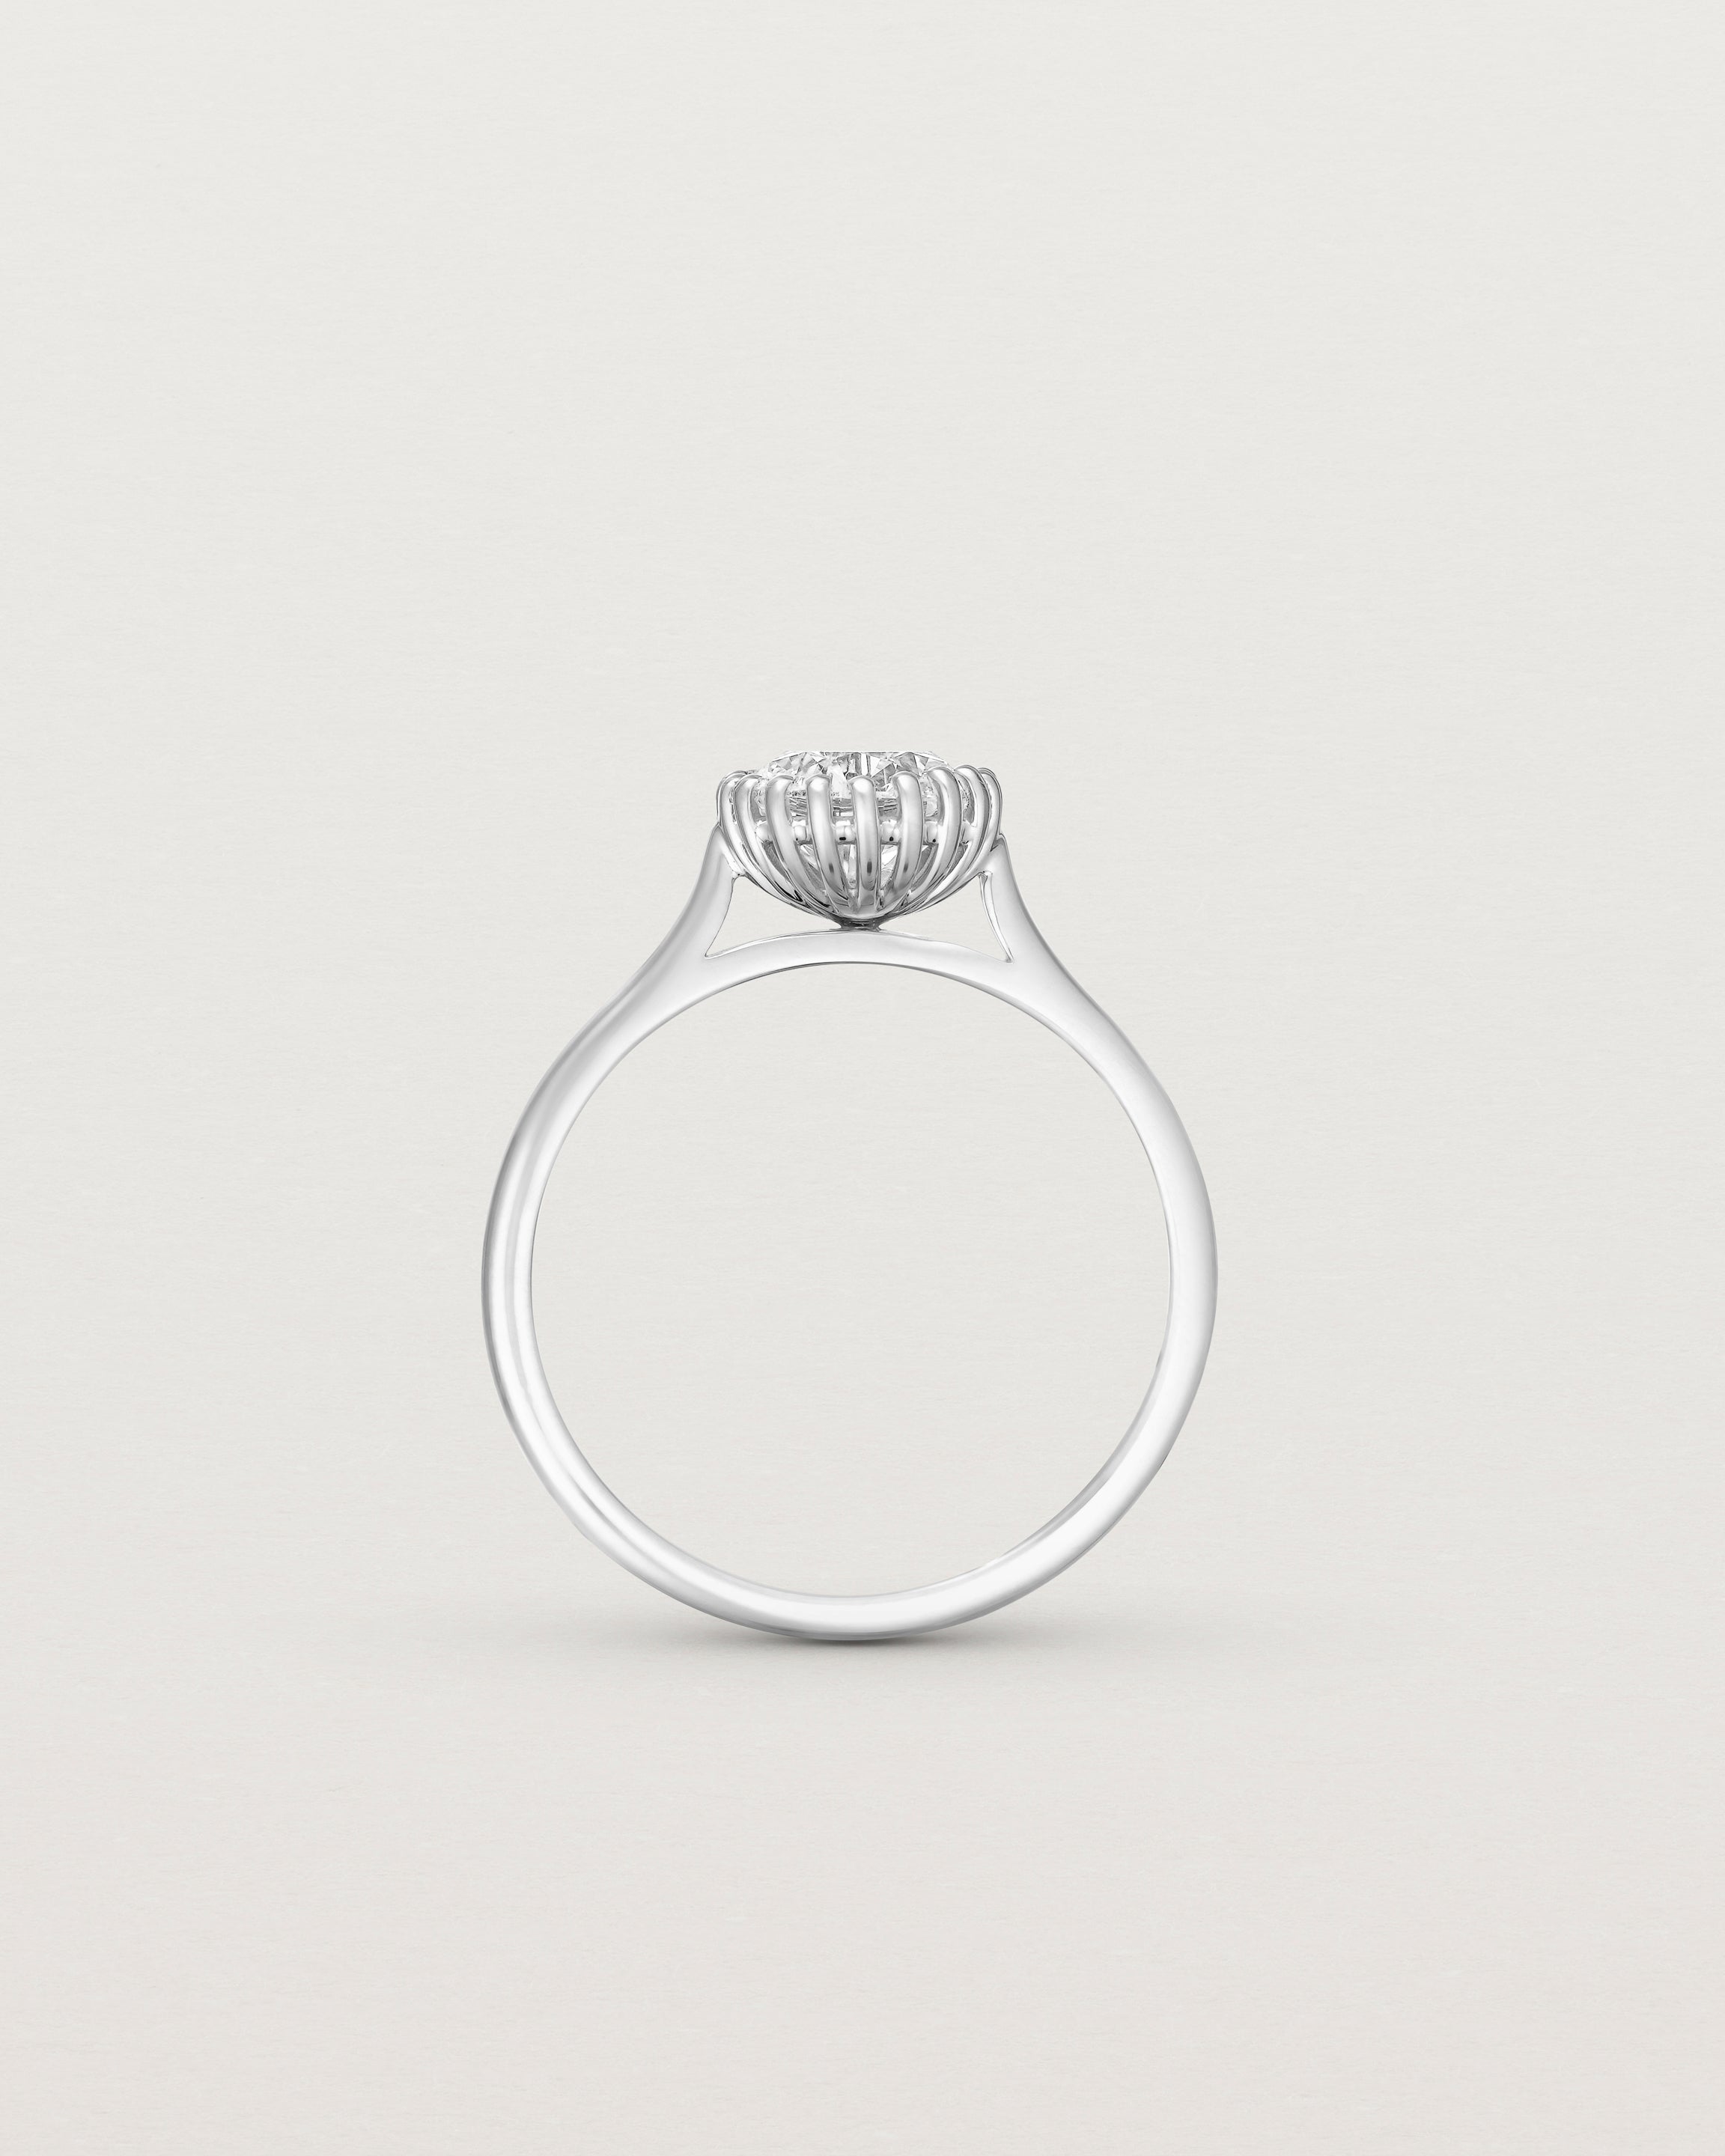 Standing view of the Meroë Round Solitaire | Laboratory Grown Diamond in white gold.